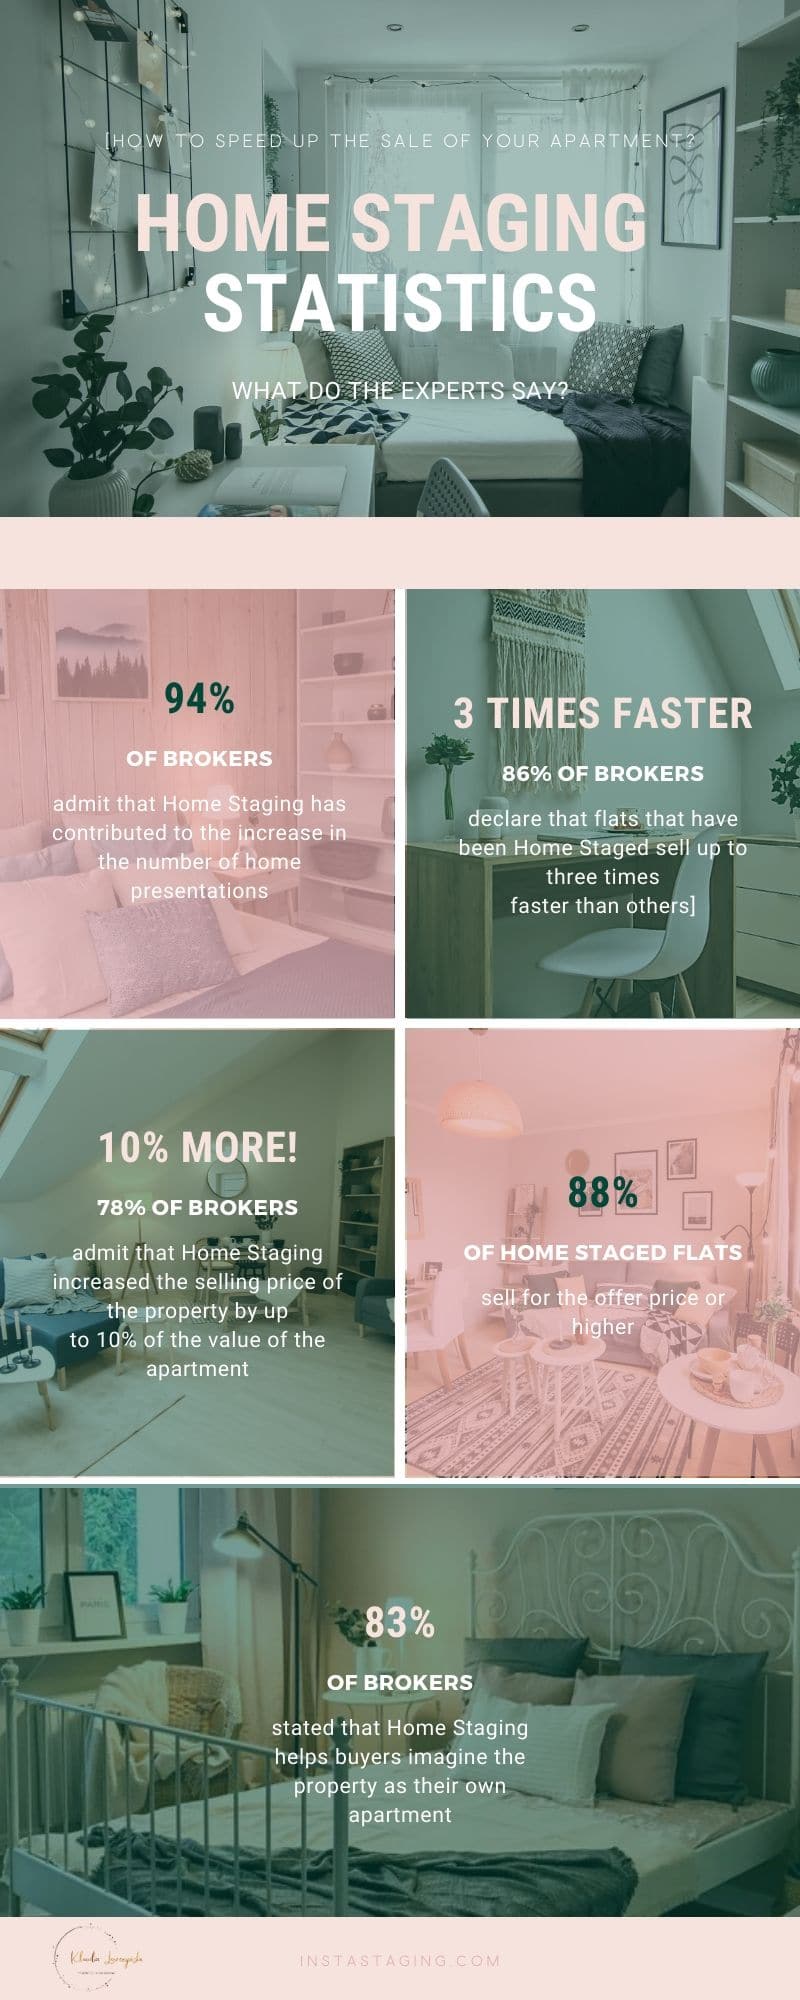 Home Staging Statistics